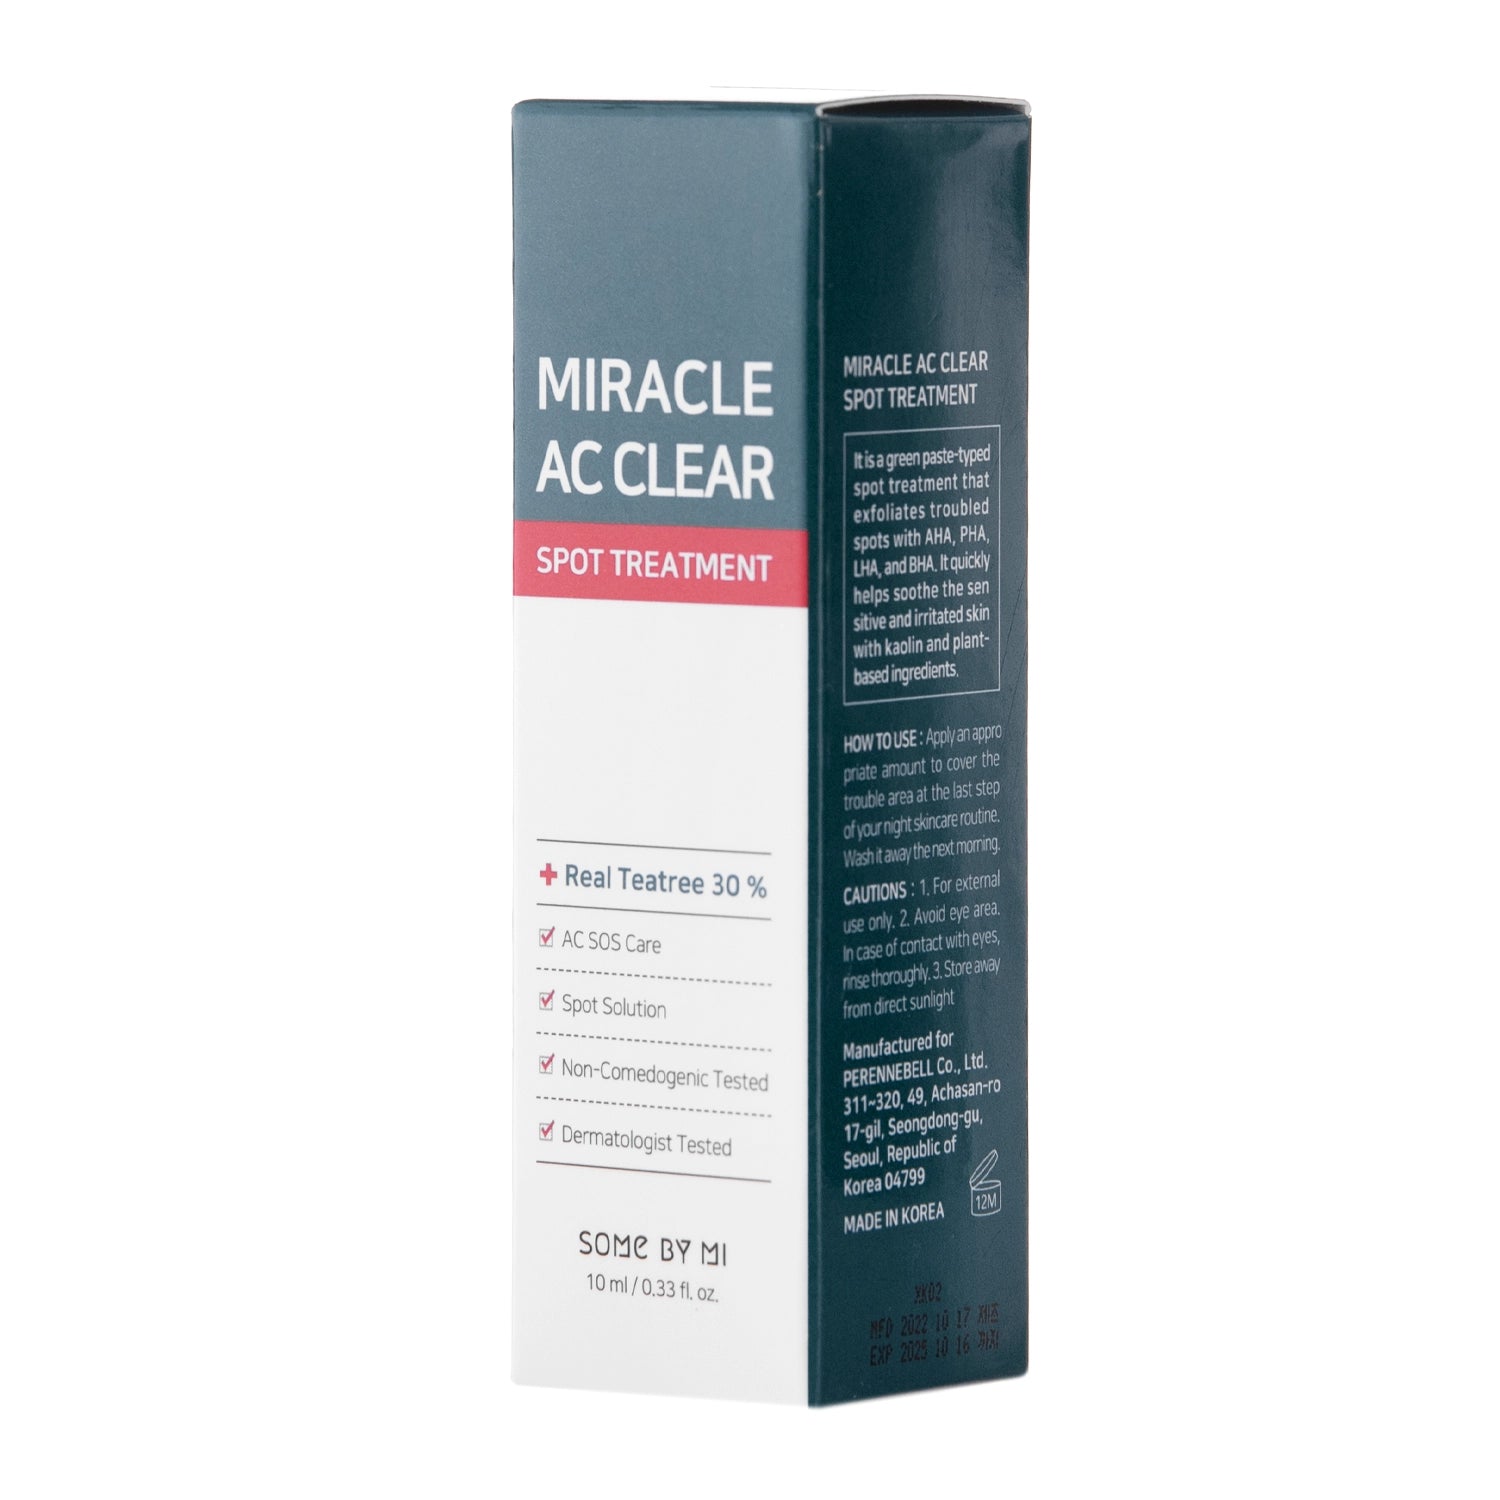 SOME BY MI Miracle AC Clear Spot Traitement 10g